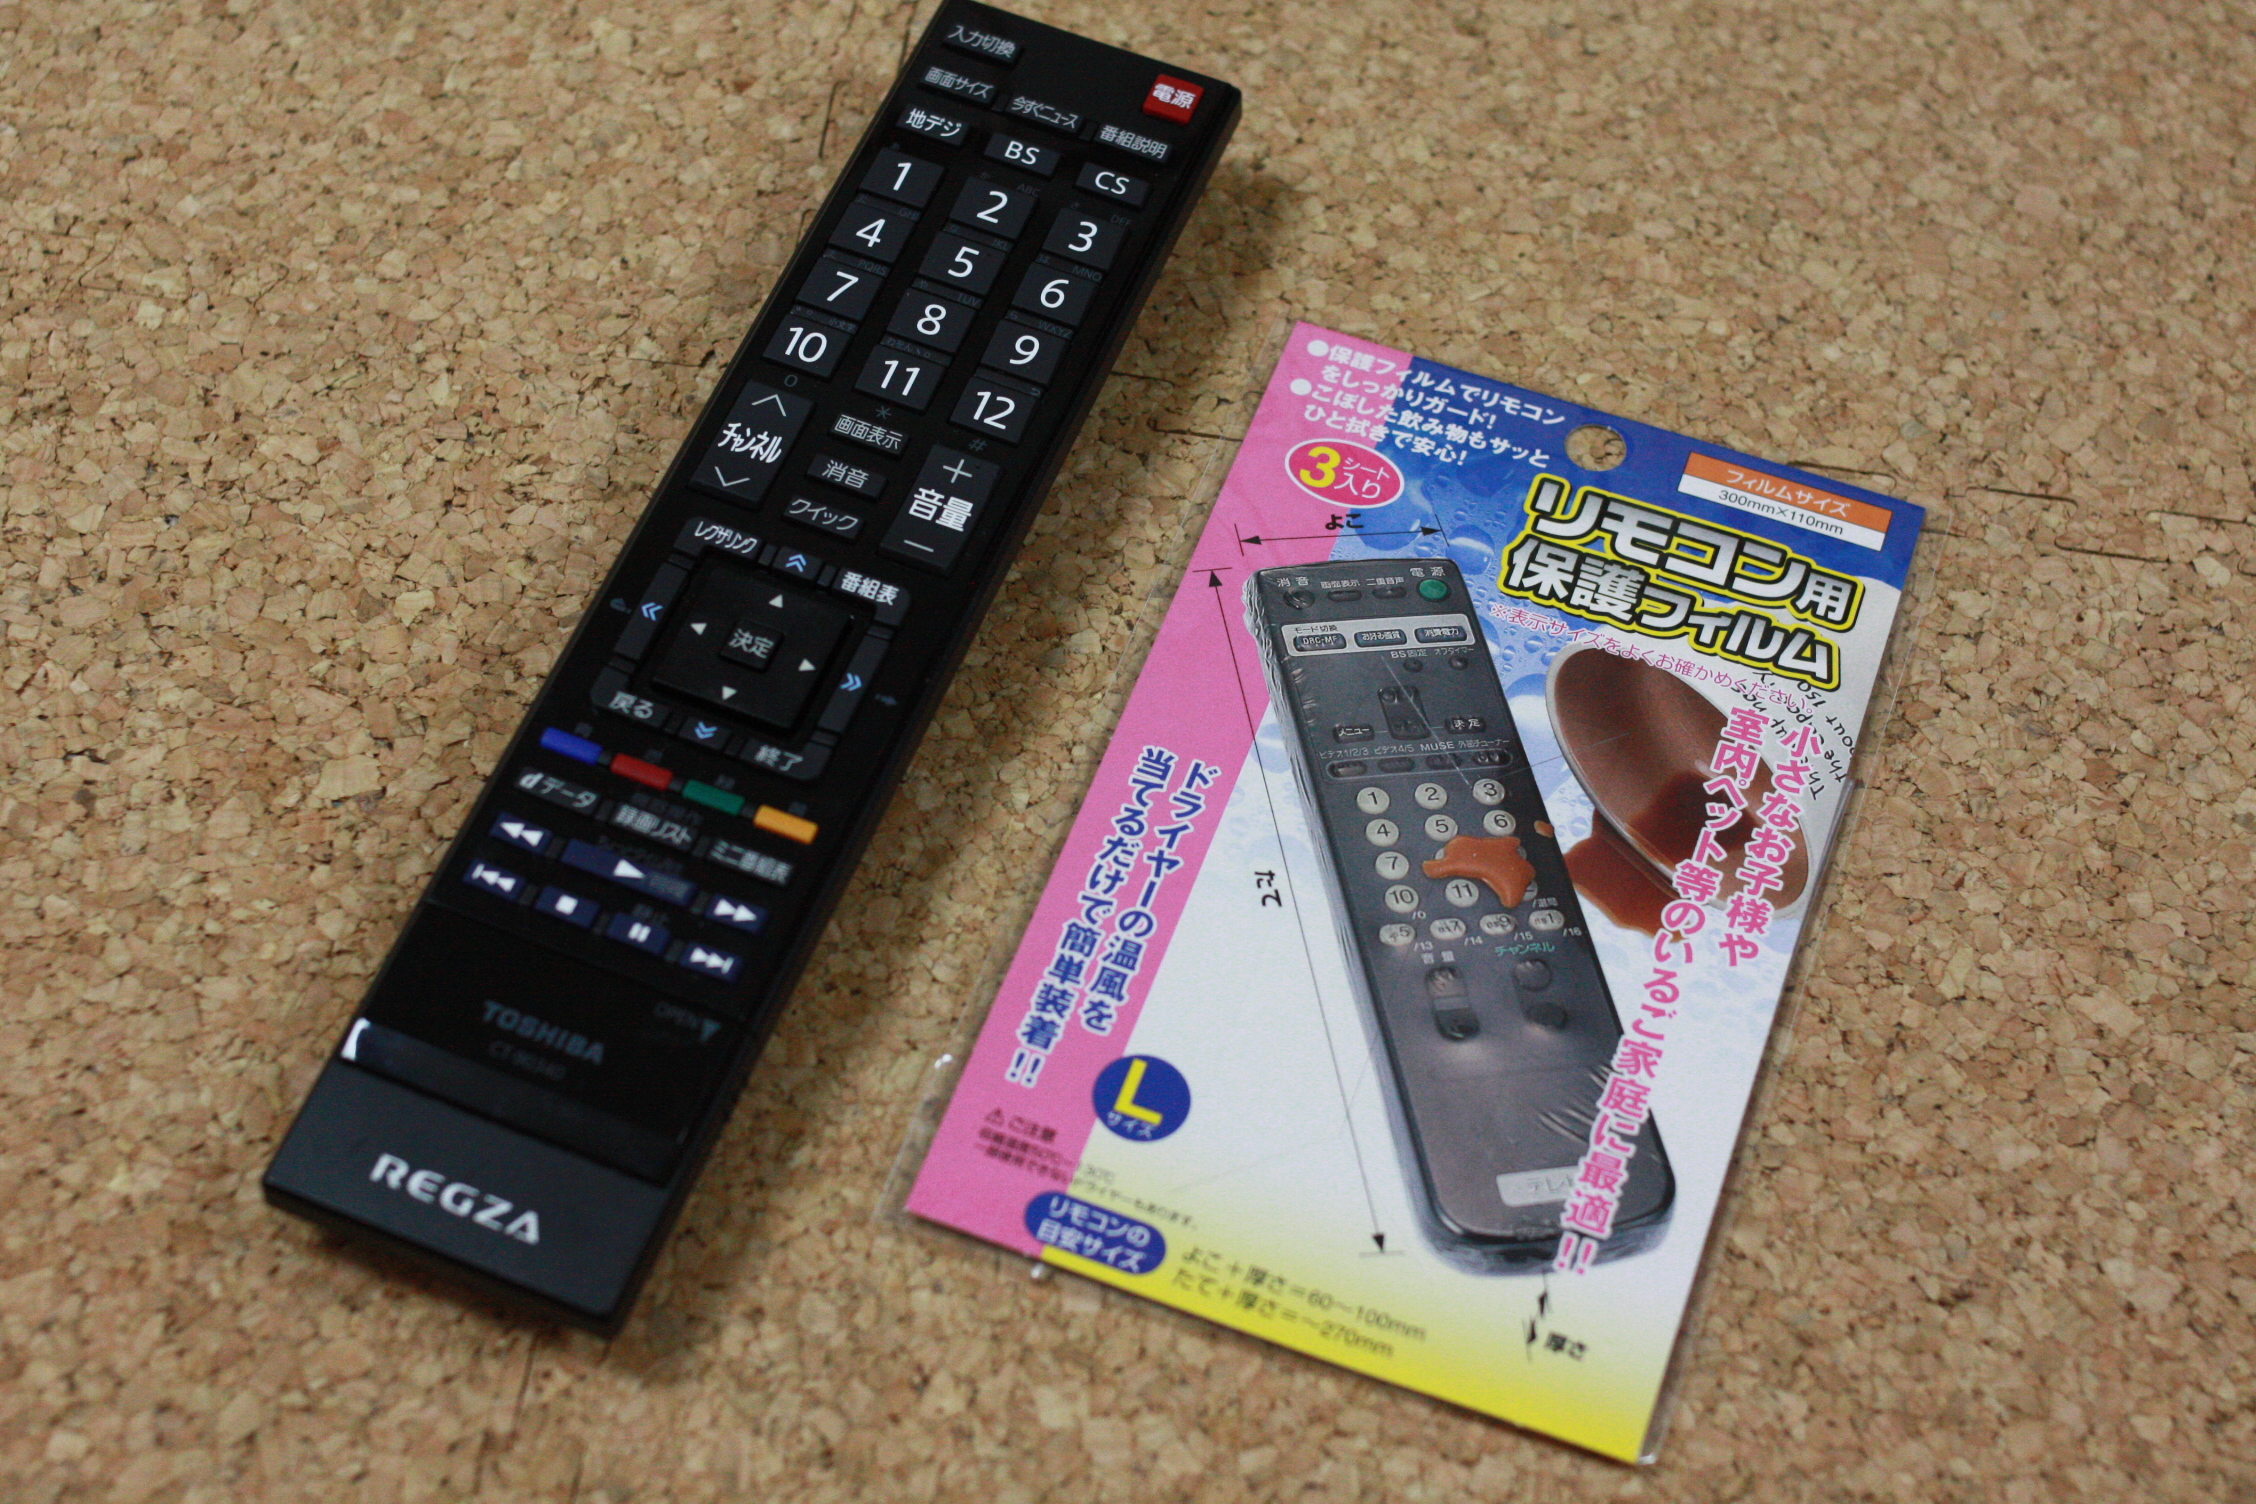 the remote control next to an ad for a new channel